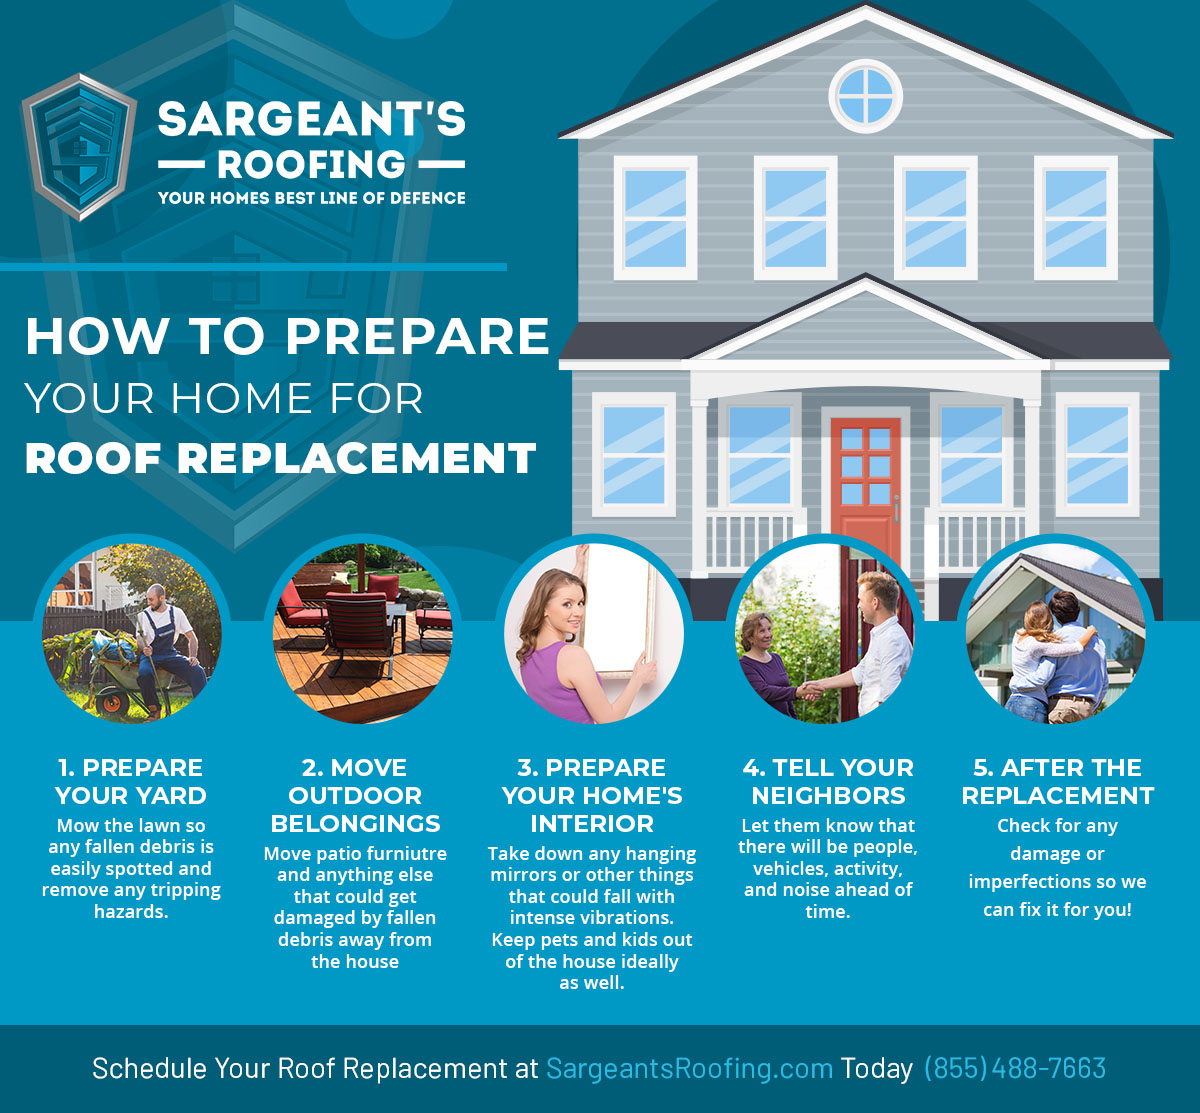 Sergeants Roofing_Roof Replacement IG